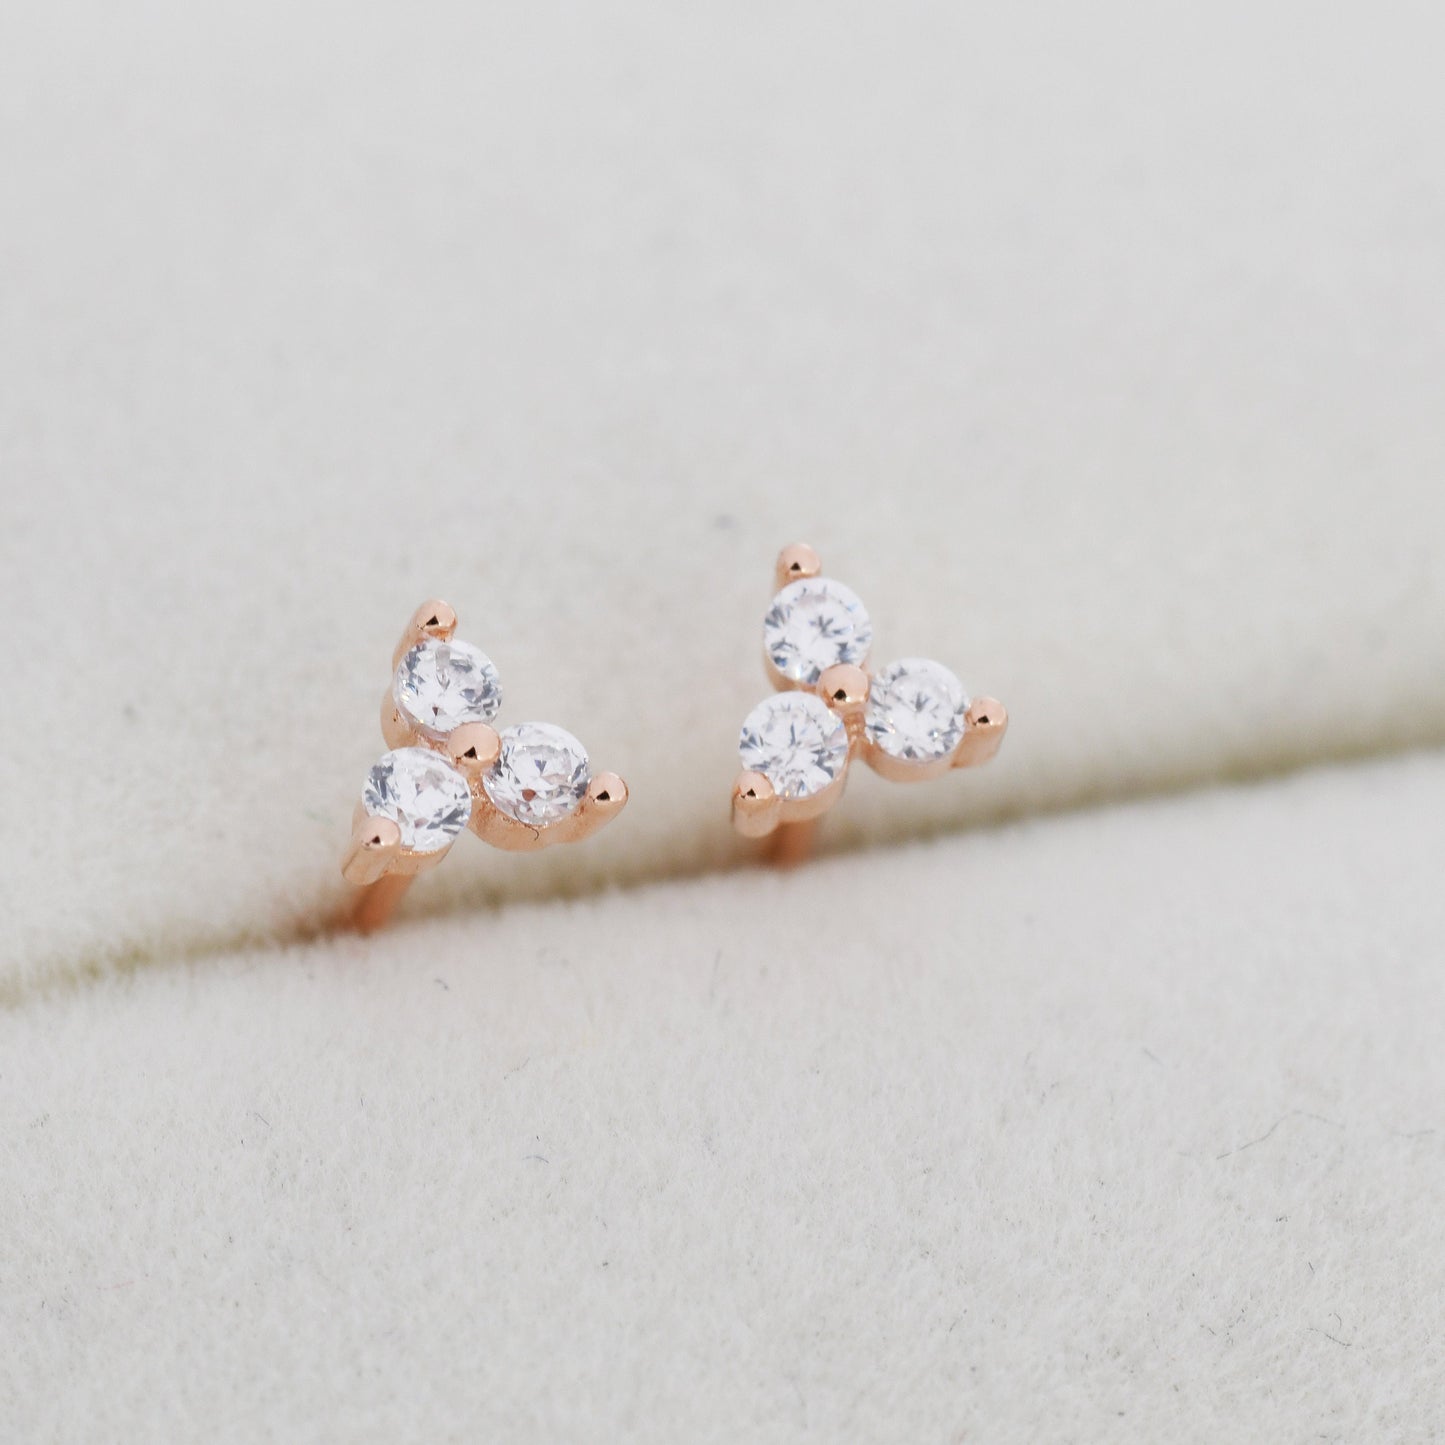 Very Tiny Three Dot Trio Stud Earrings in Sterling Silver with Sparkly CZ Crystals, Silver, Gold, Rose Gold